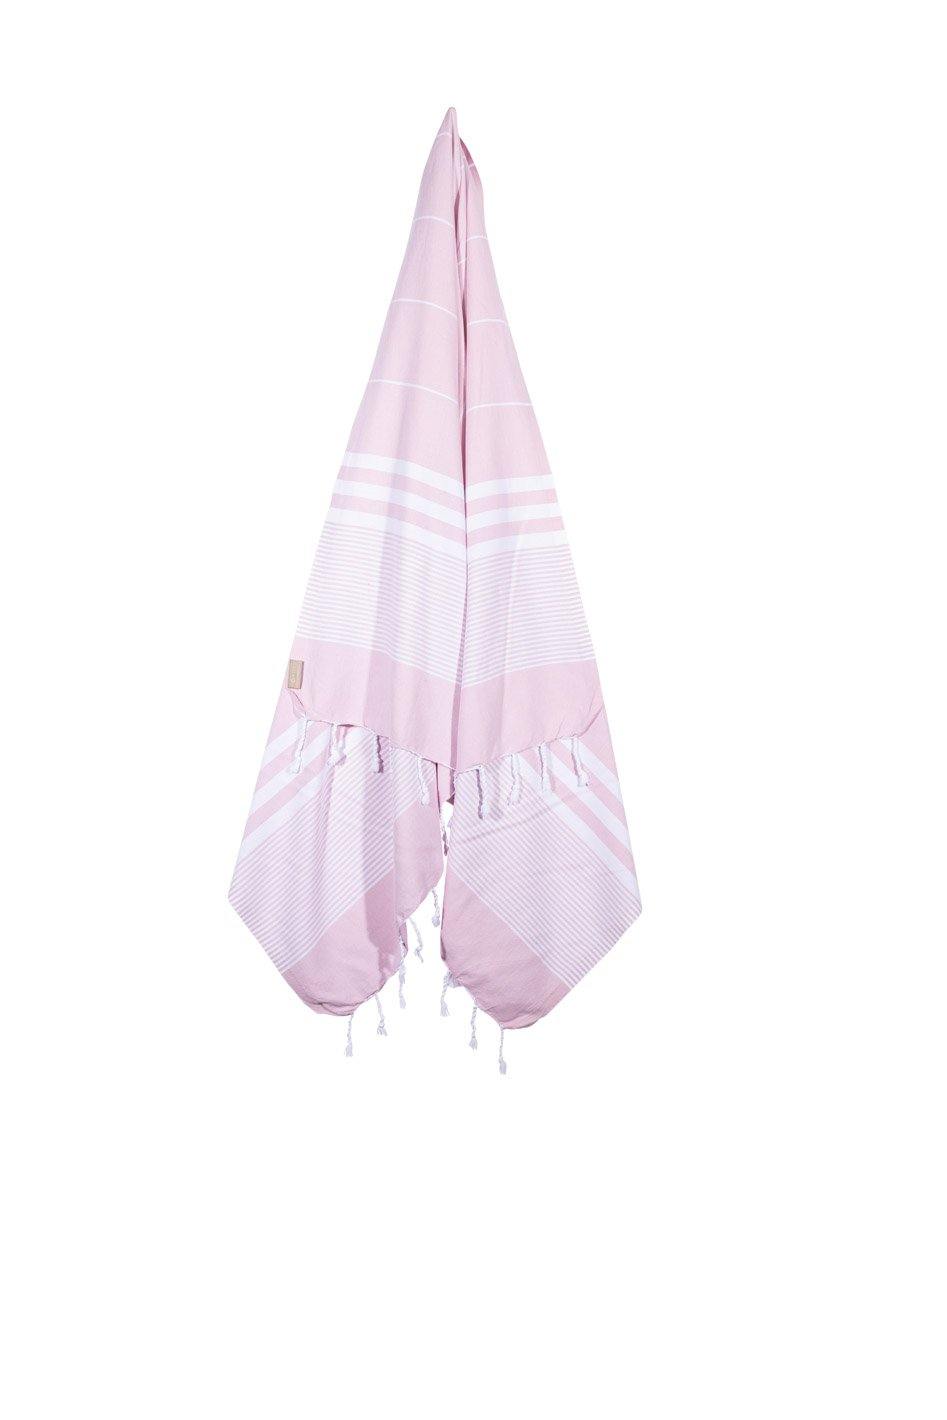 Kali - Pink and White Striped Quick Drying Towel Full Length